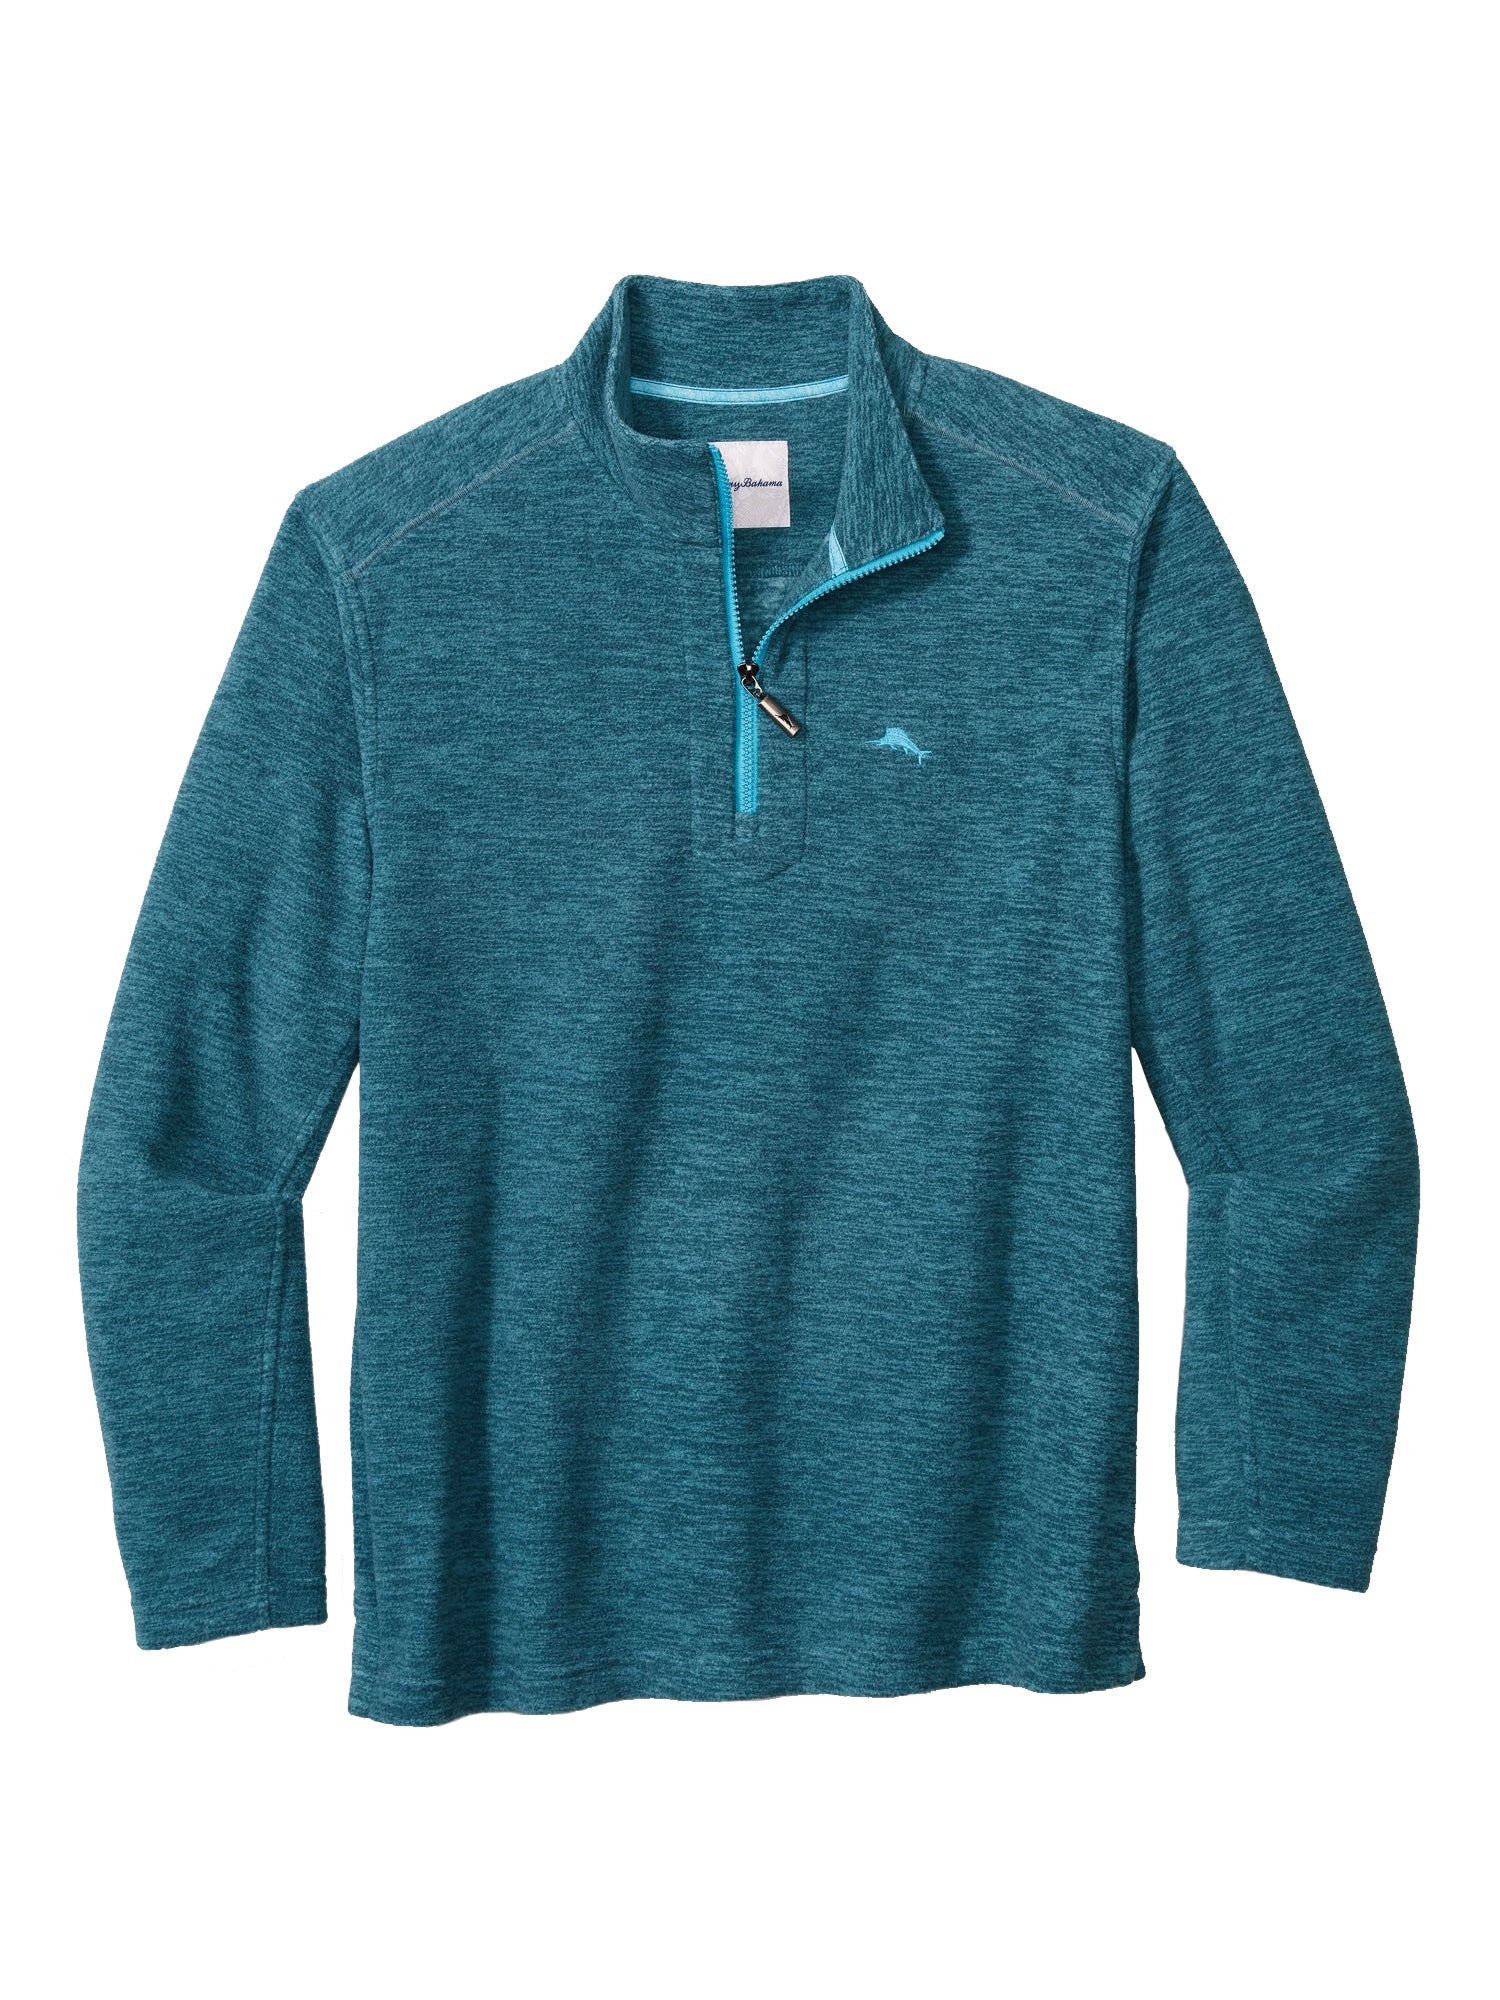 Tommy Bahama Cloud Peak 1/2 Zip in 'At Sea' - Tall Sizes